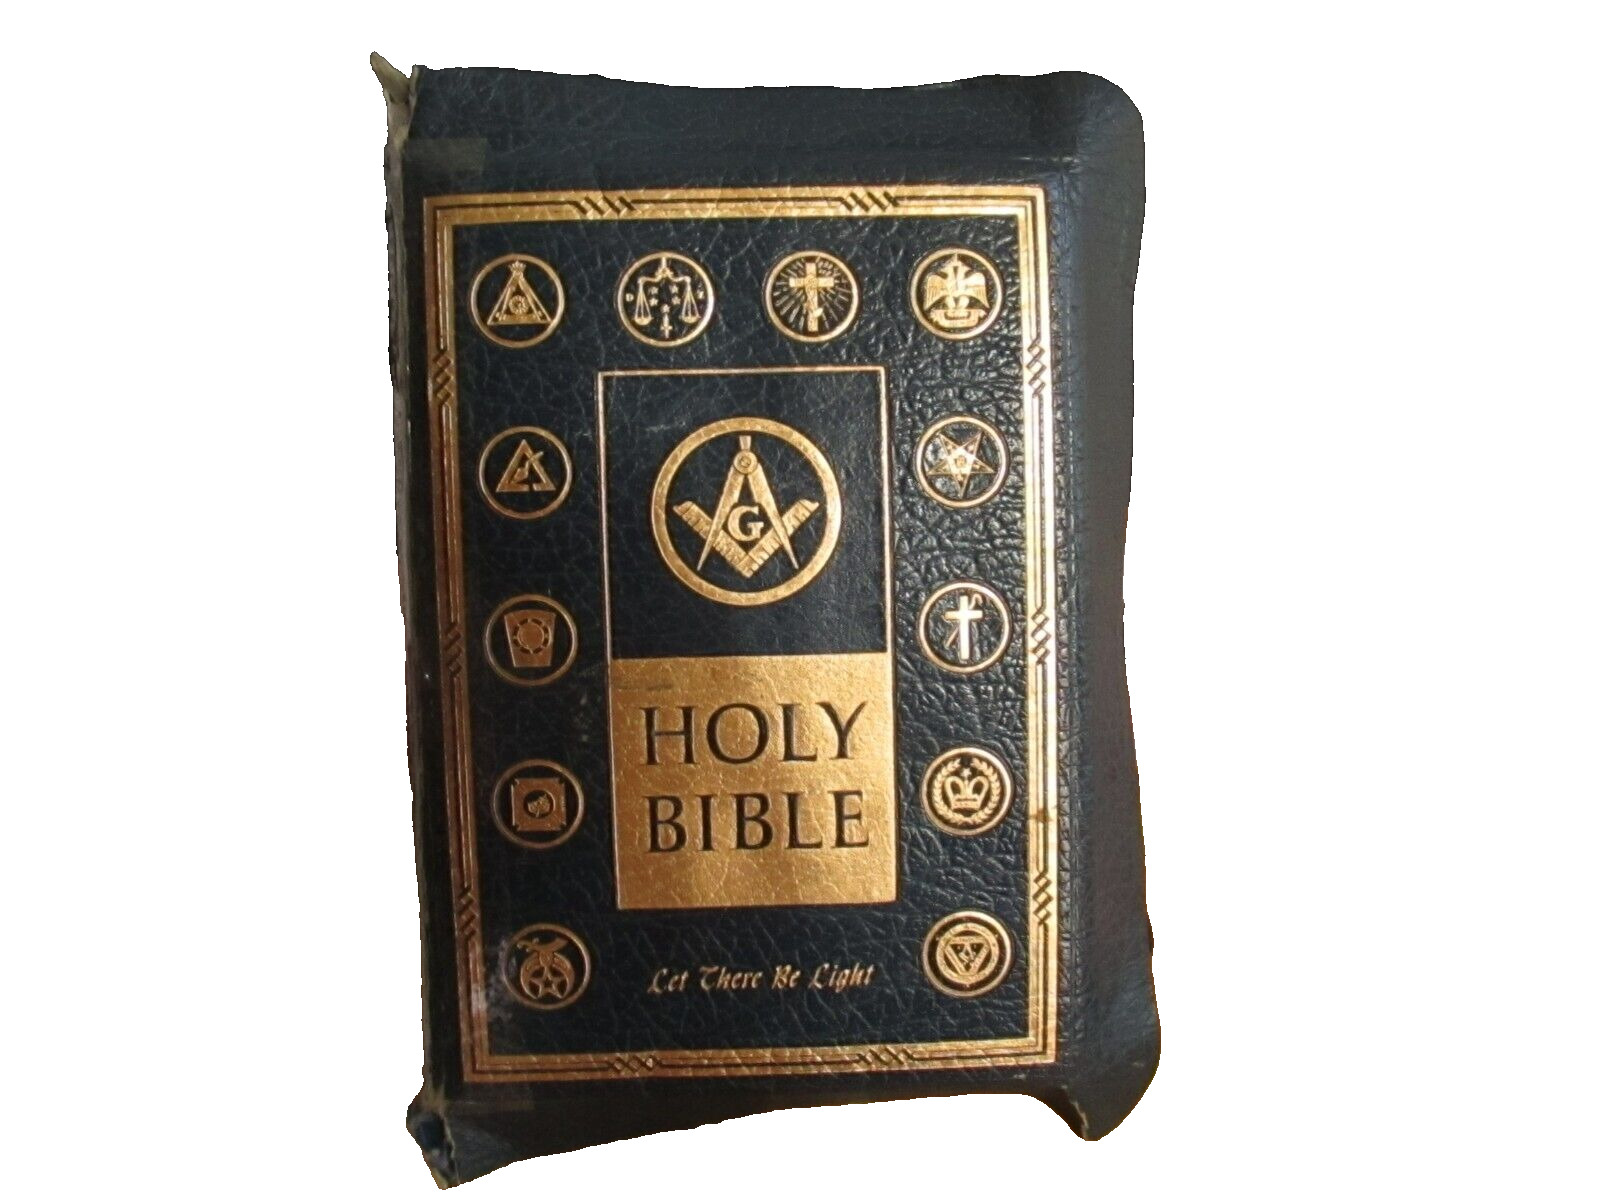 Vintage Holy Bible Let There Be Light Masonic Edition 1950 Leather Binding KJV